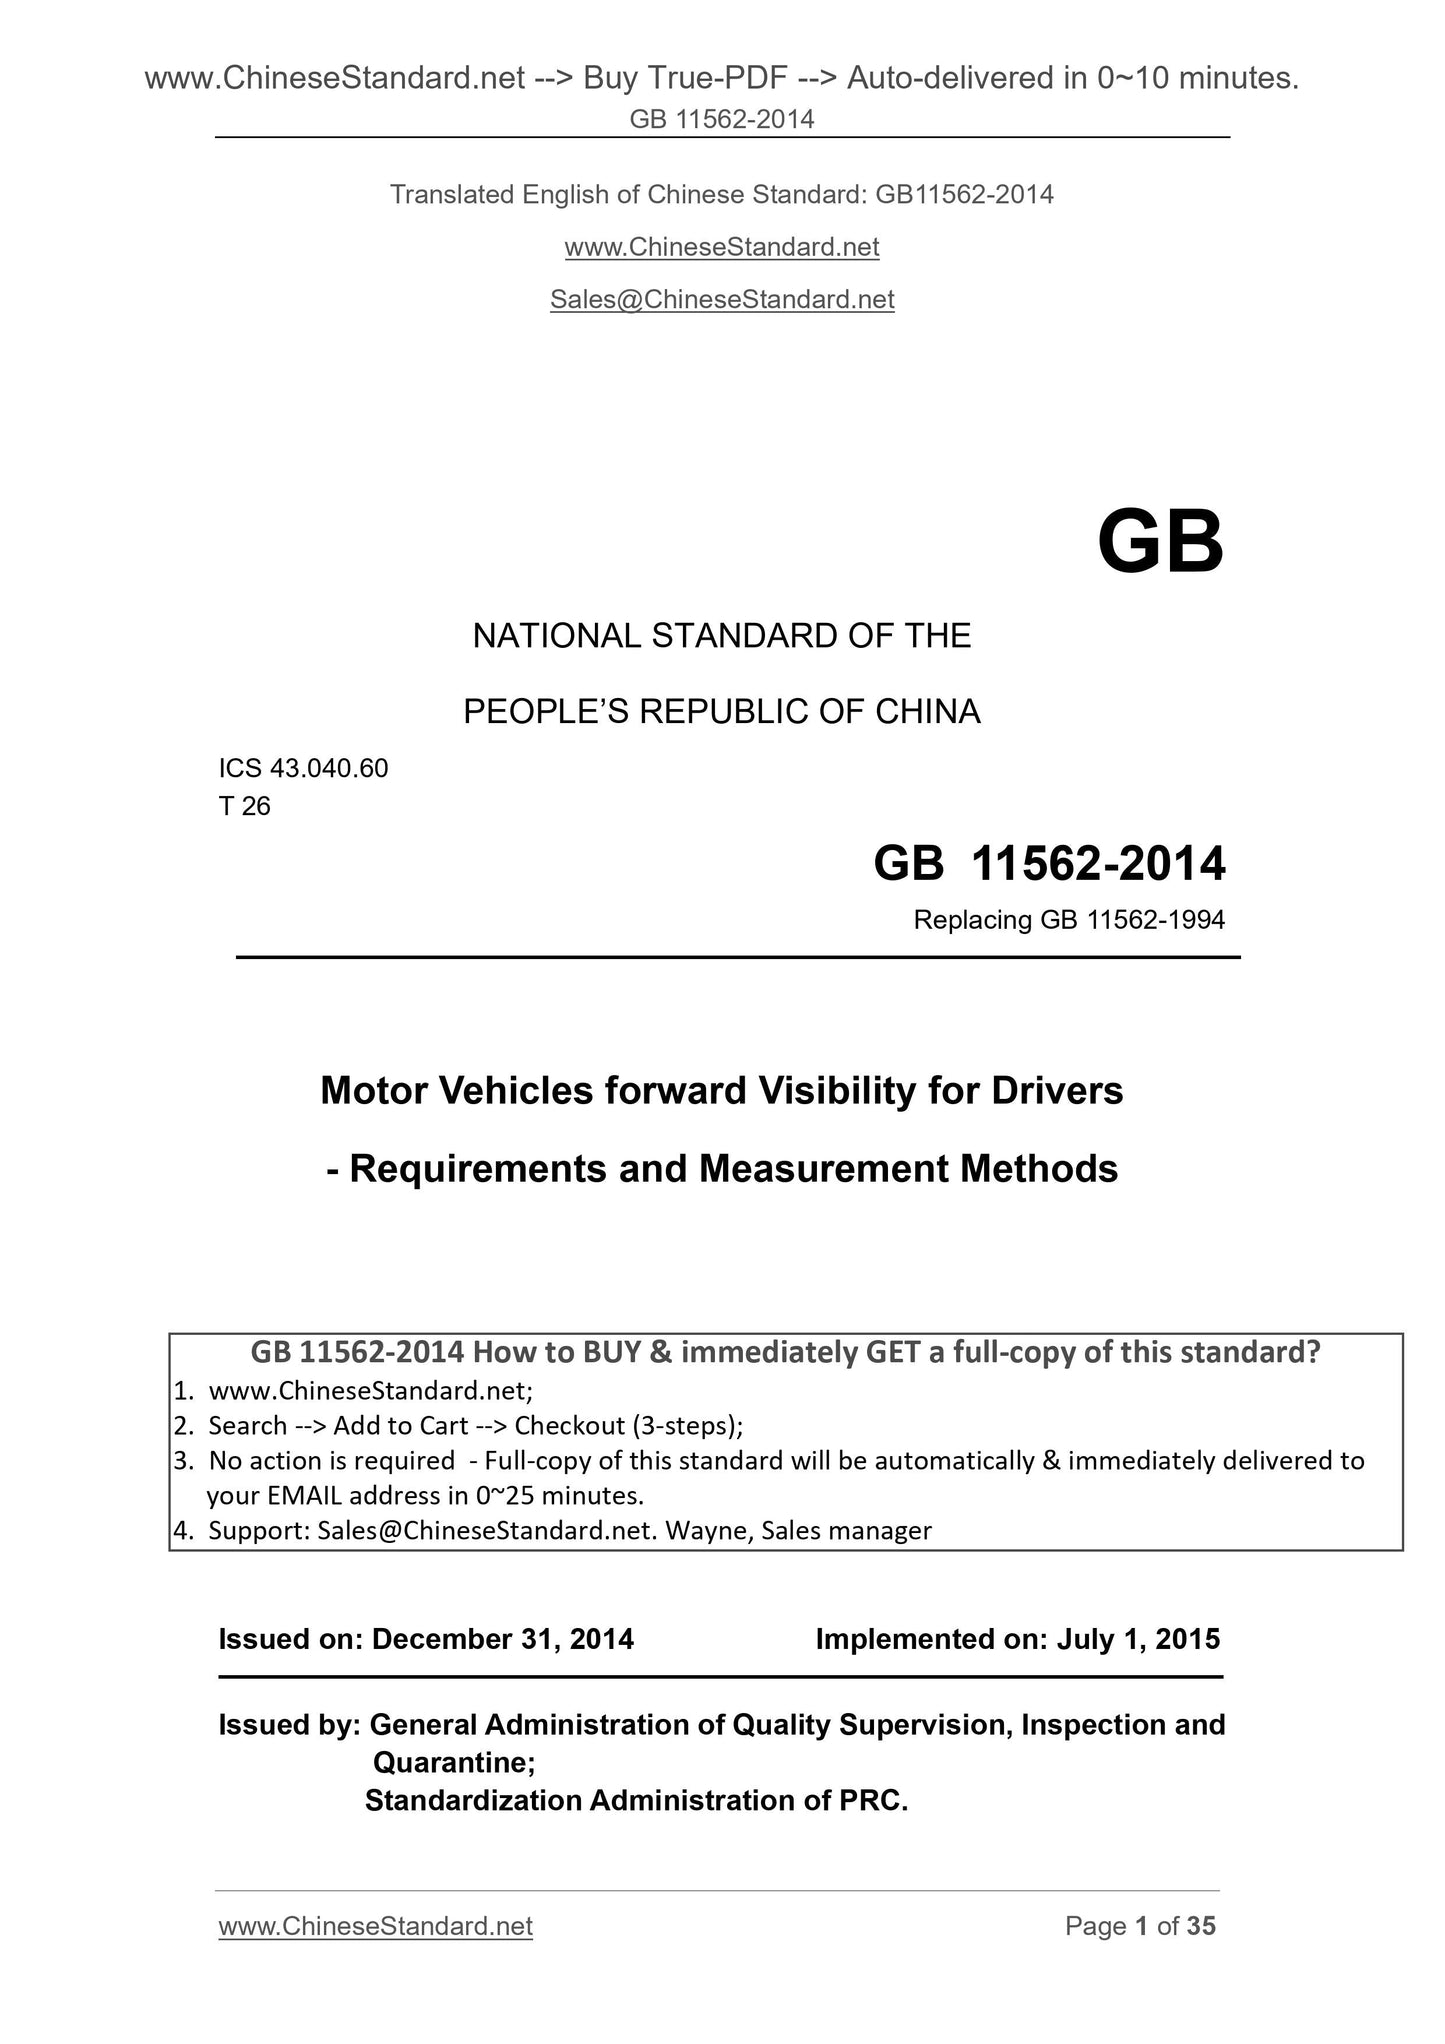 GB 11562-2014 Page 1